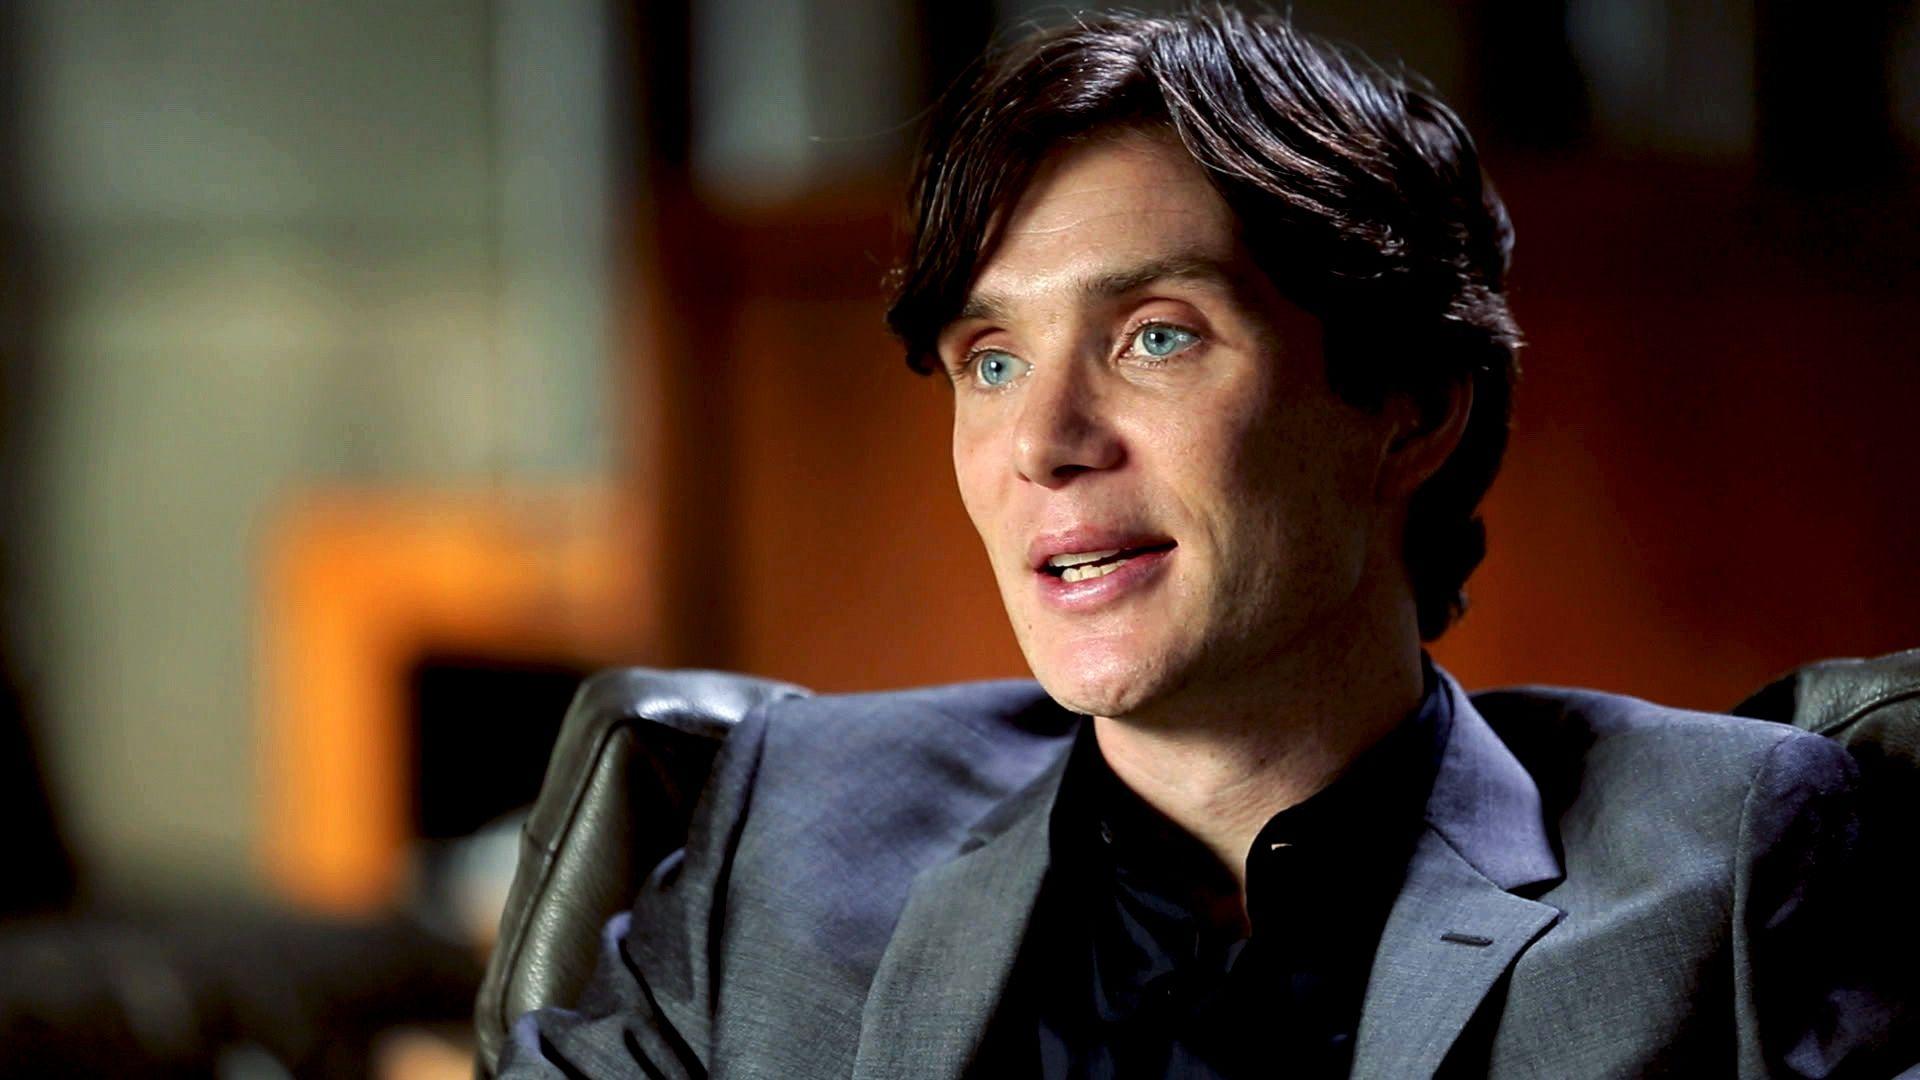 Cillian Murphy Wallpaper Image Photo Picture Background